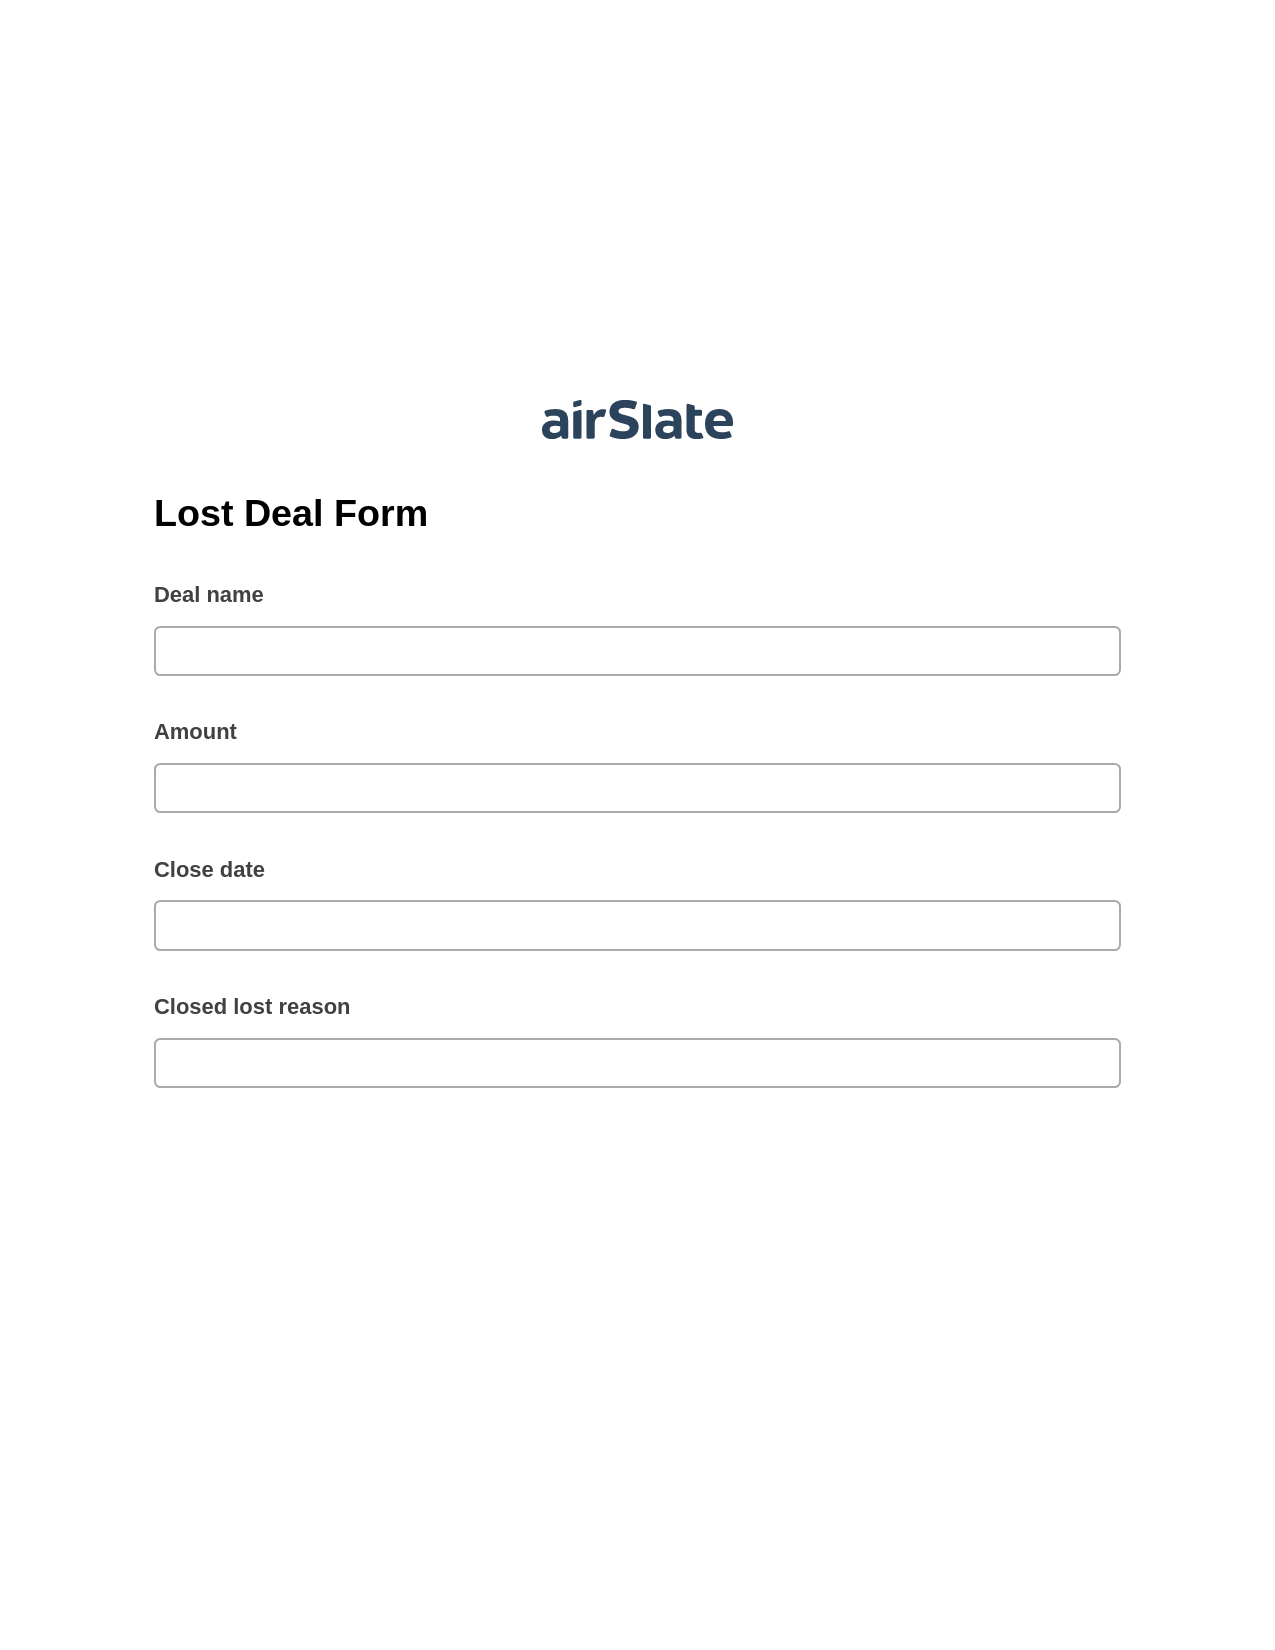 Lost Deal Form Pre-fill from Excel Spreadsheet Bot, Reminder Bot, Post-finish Document Bot